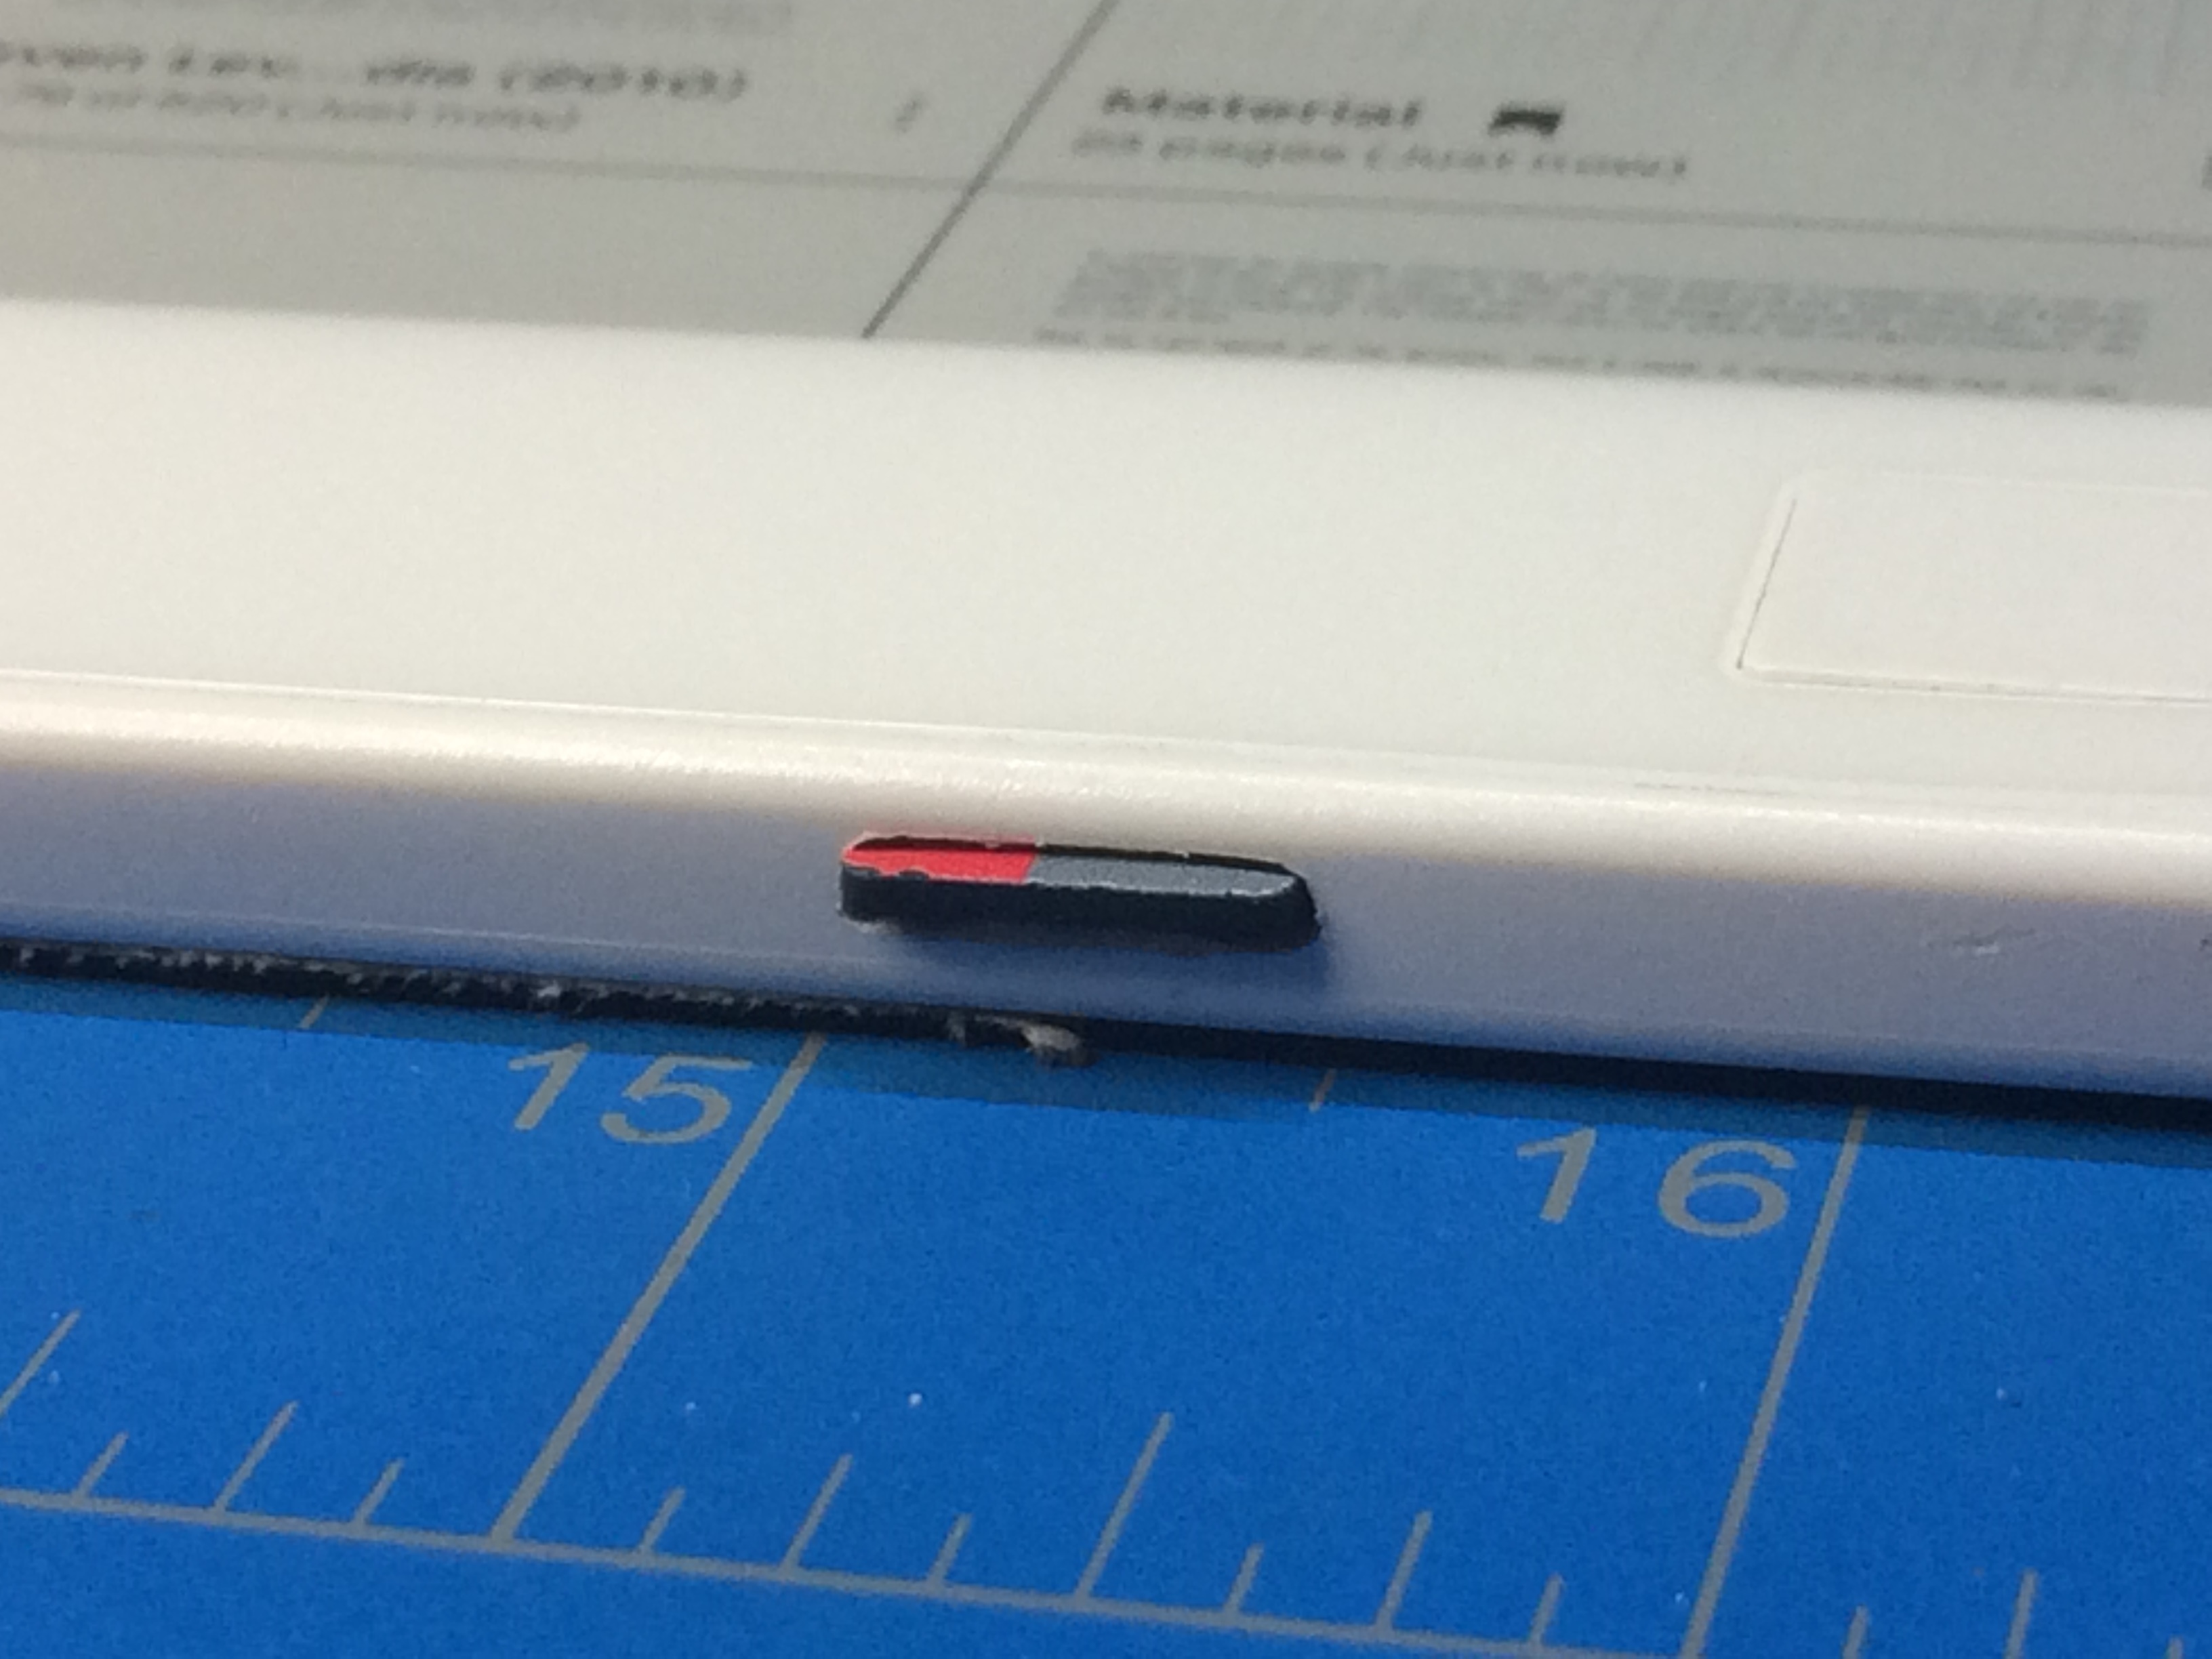 microSD slot from the outside